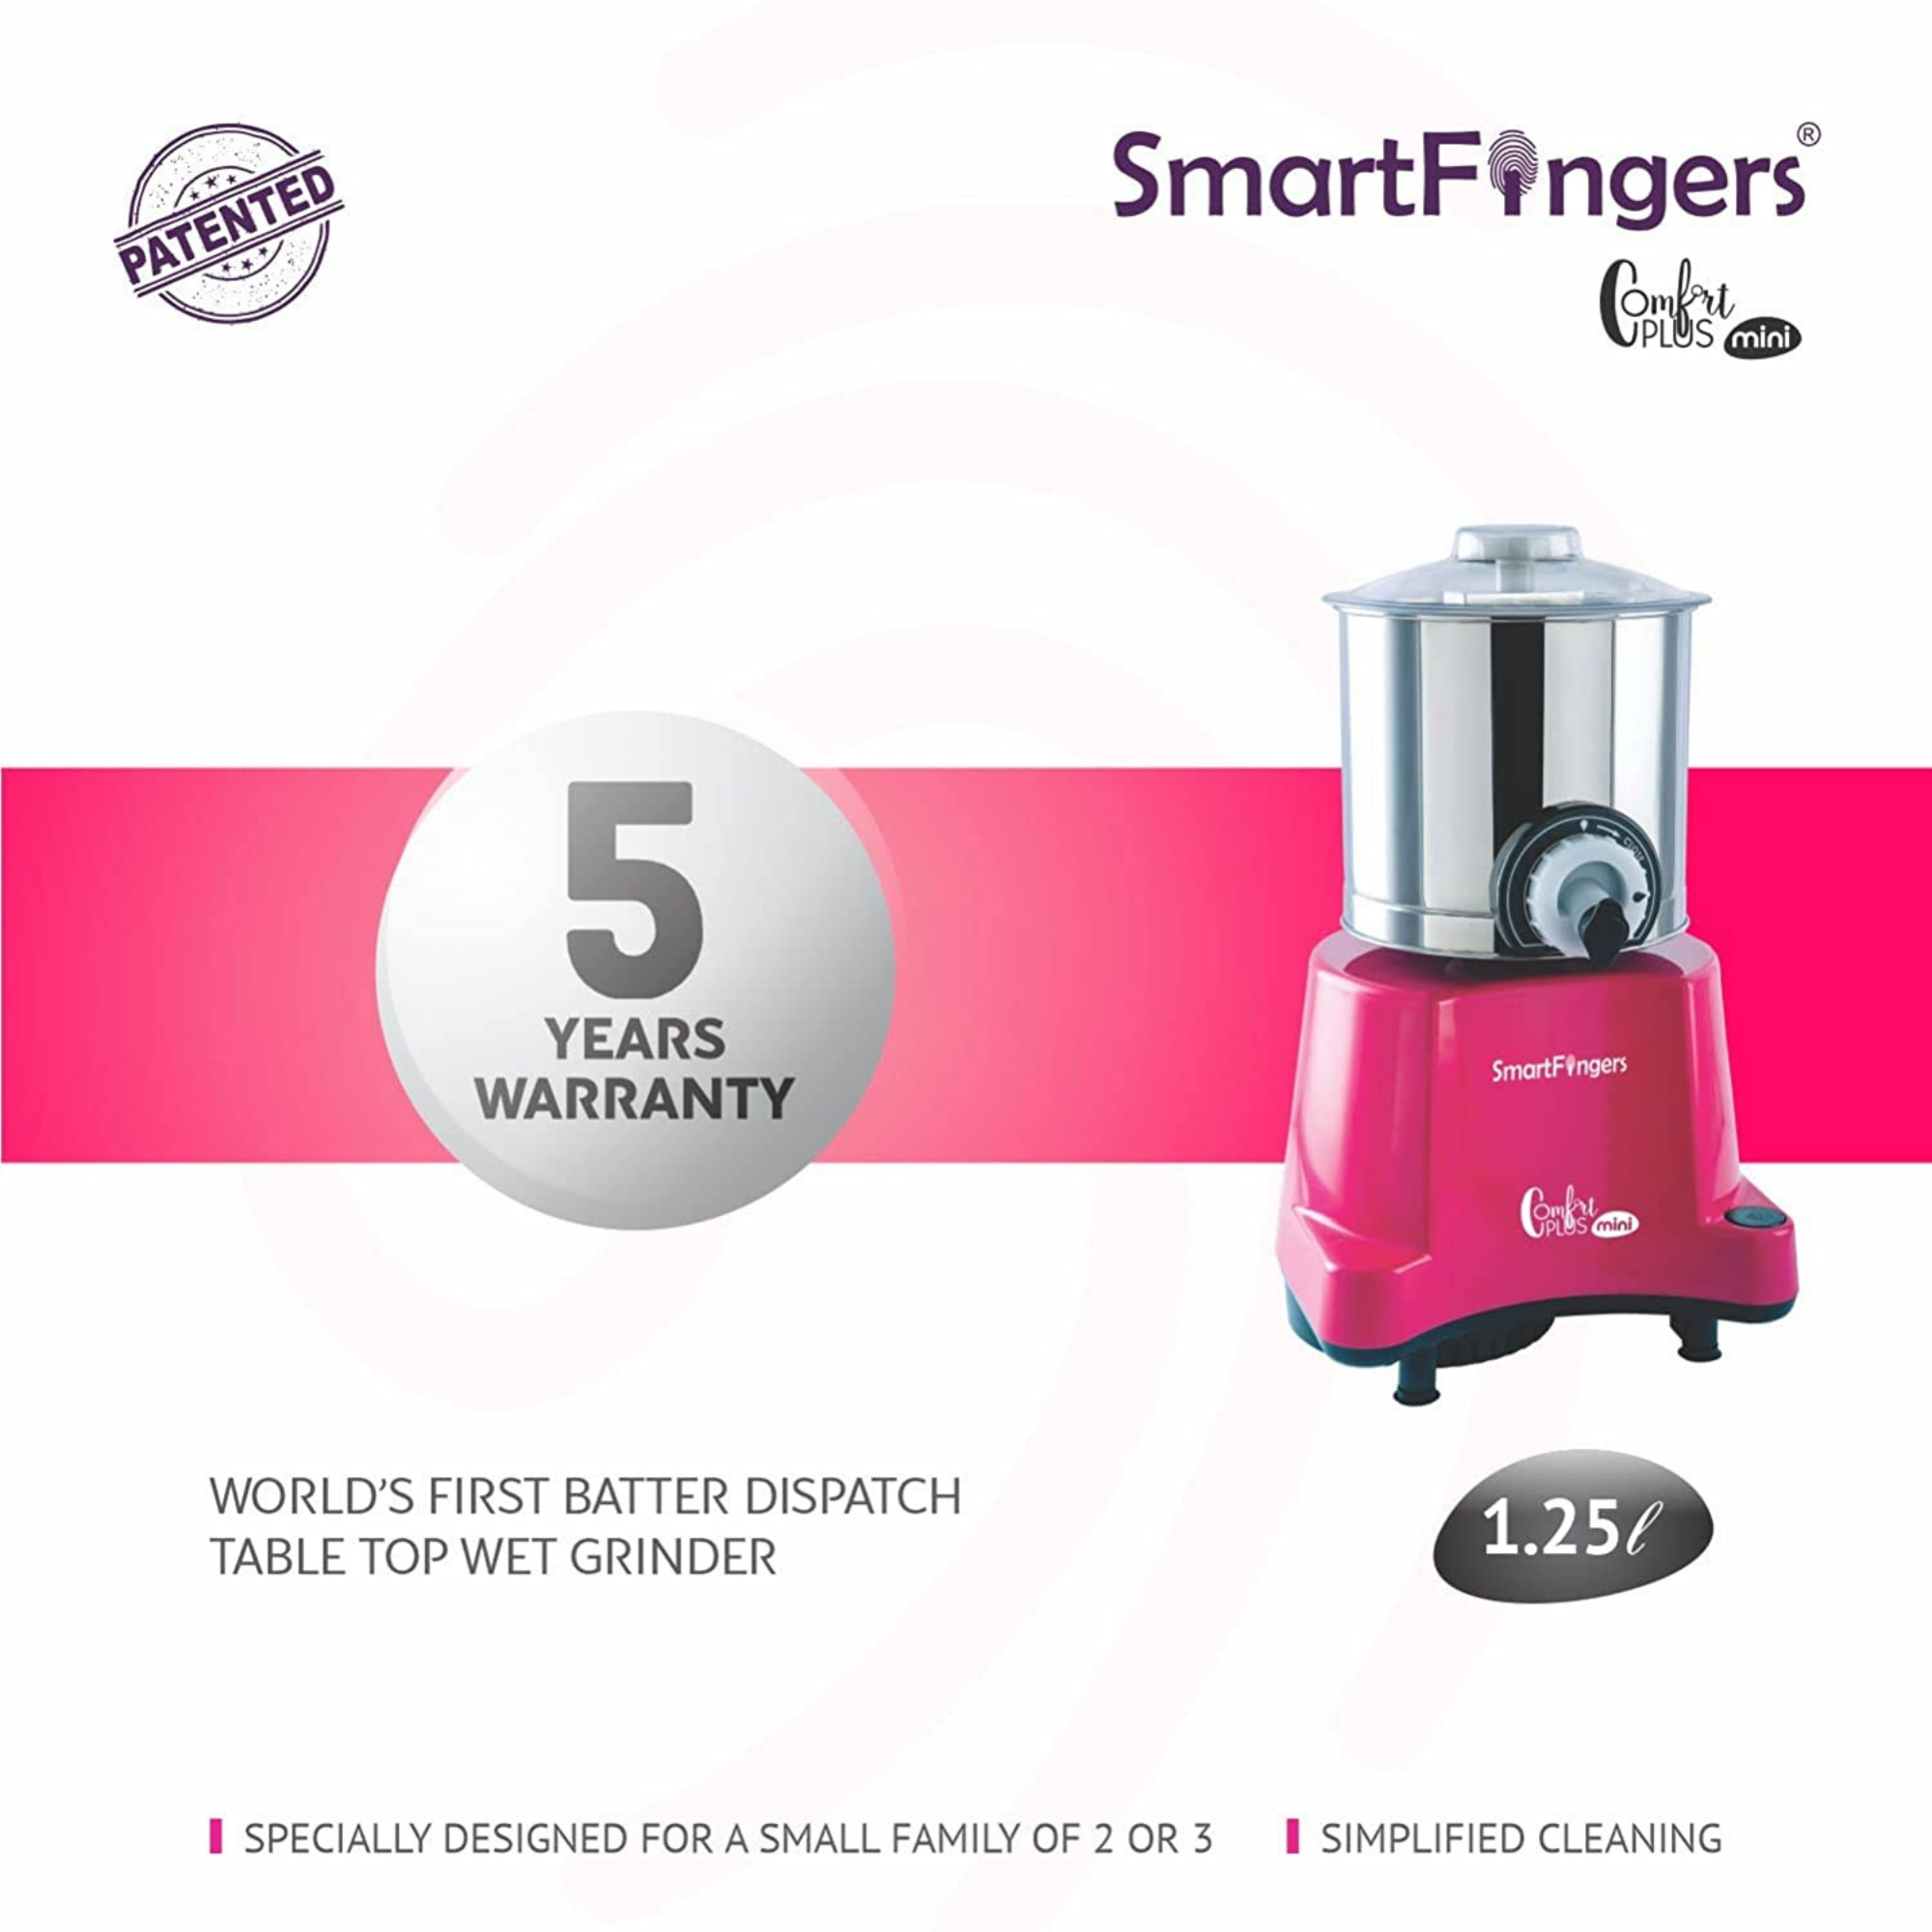 SmartFingers Comfort Plus Mini Table Top Wet Grinder, 1.25 Liter, 110 volts for use in usa and Canada only